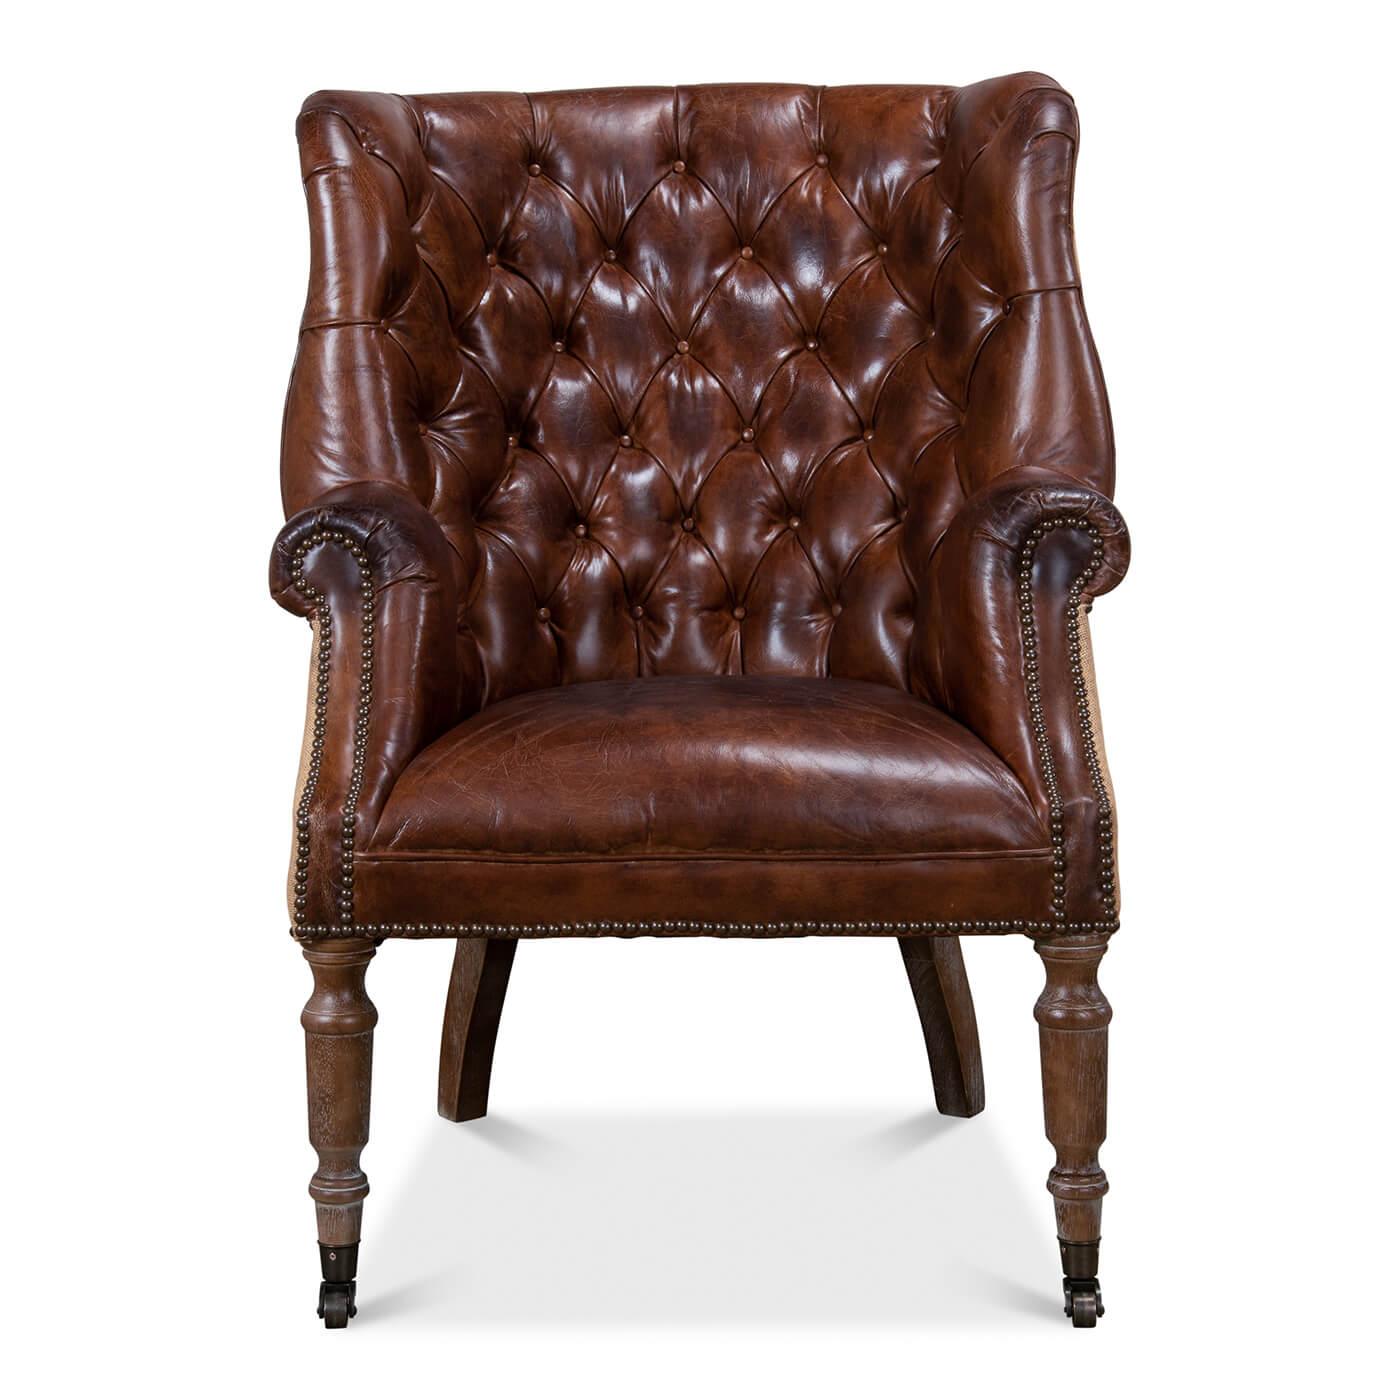 A wonderful George III style barrel back wingchair with top-grain vintage cigar colored leather, a tufted upholstery barrel backrest with winged sides, rolled arms and a padded seat with the reverse covered with jute. Finished with brass nailhead